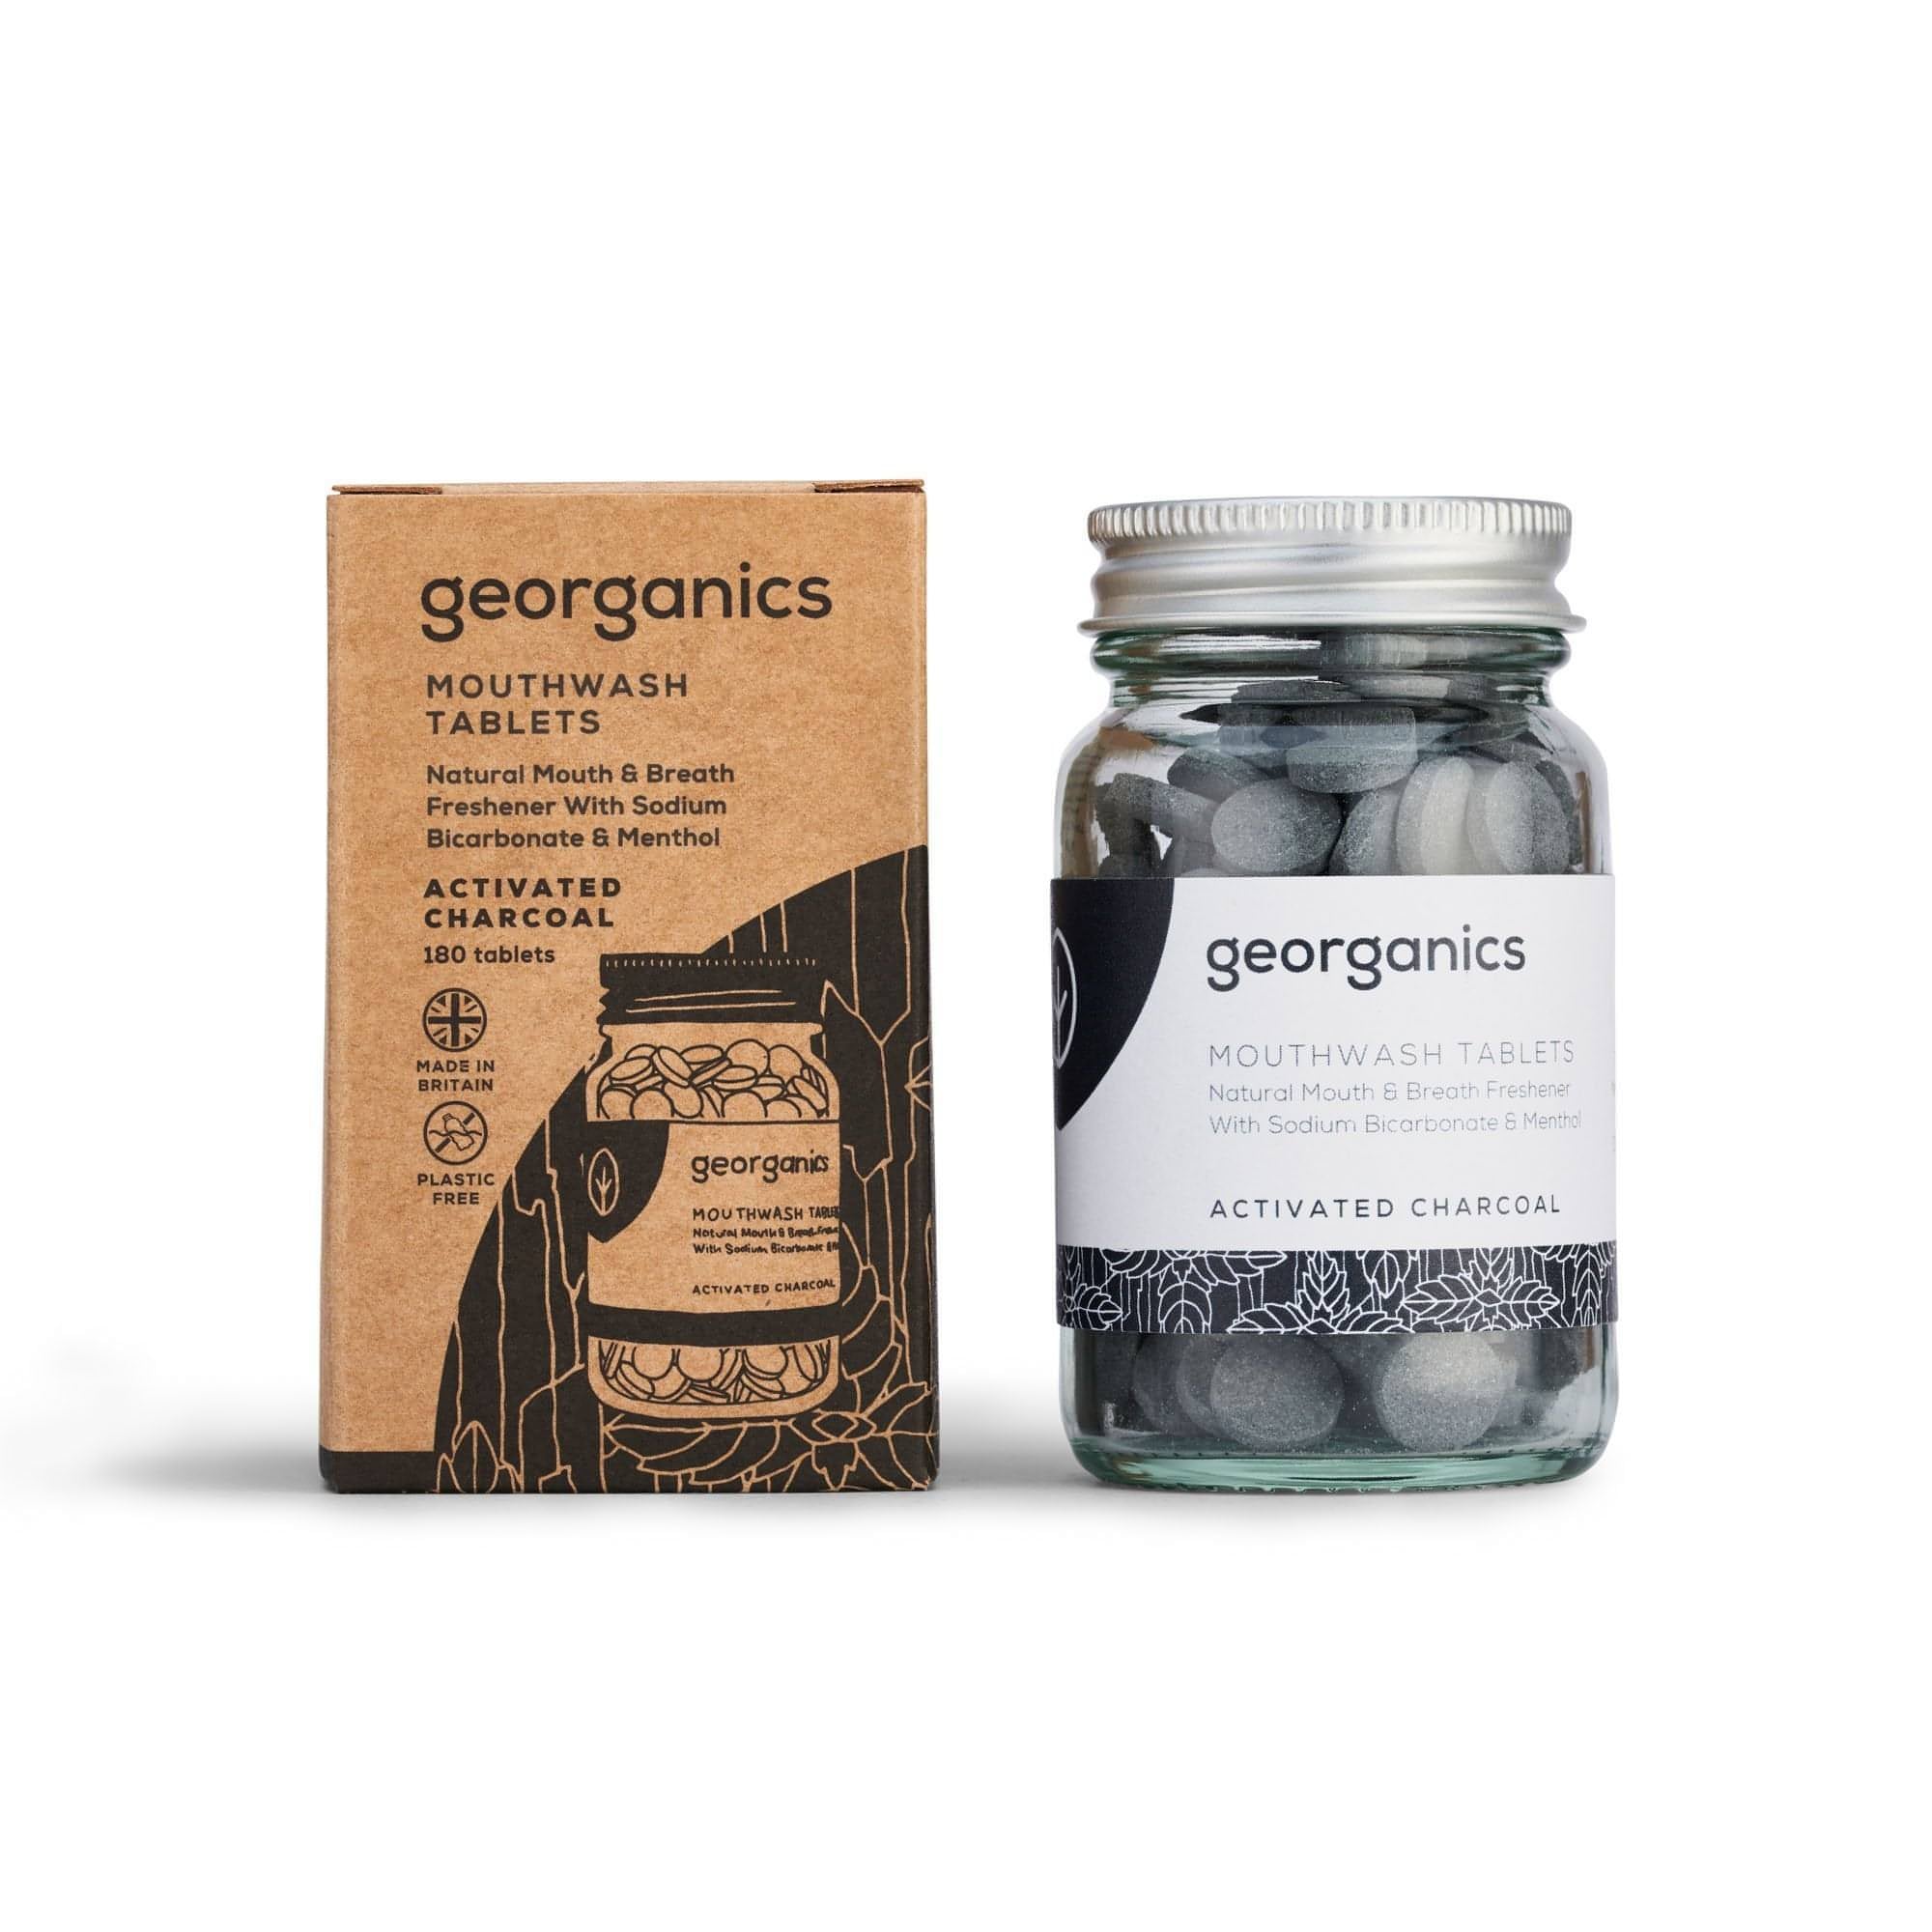 Mouthwash Tablets - Activated Charcoal - Georganics Oral Care